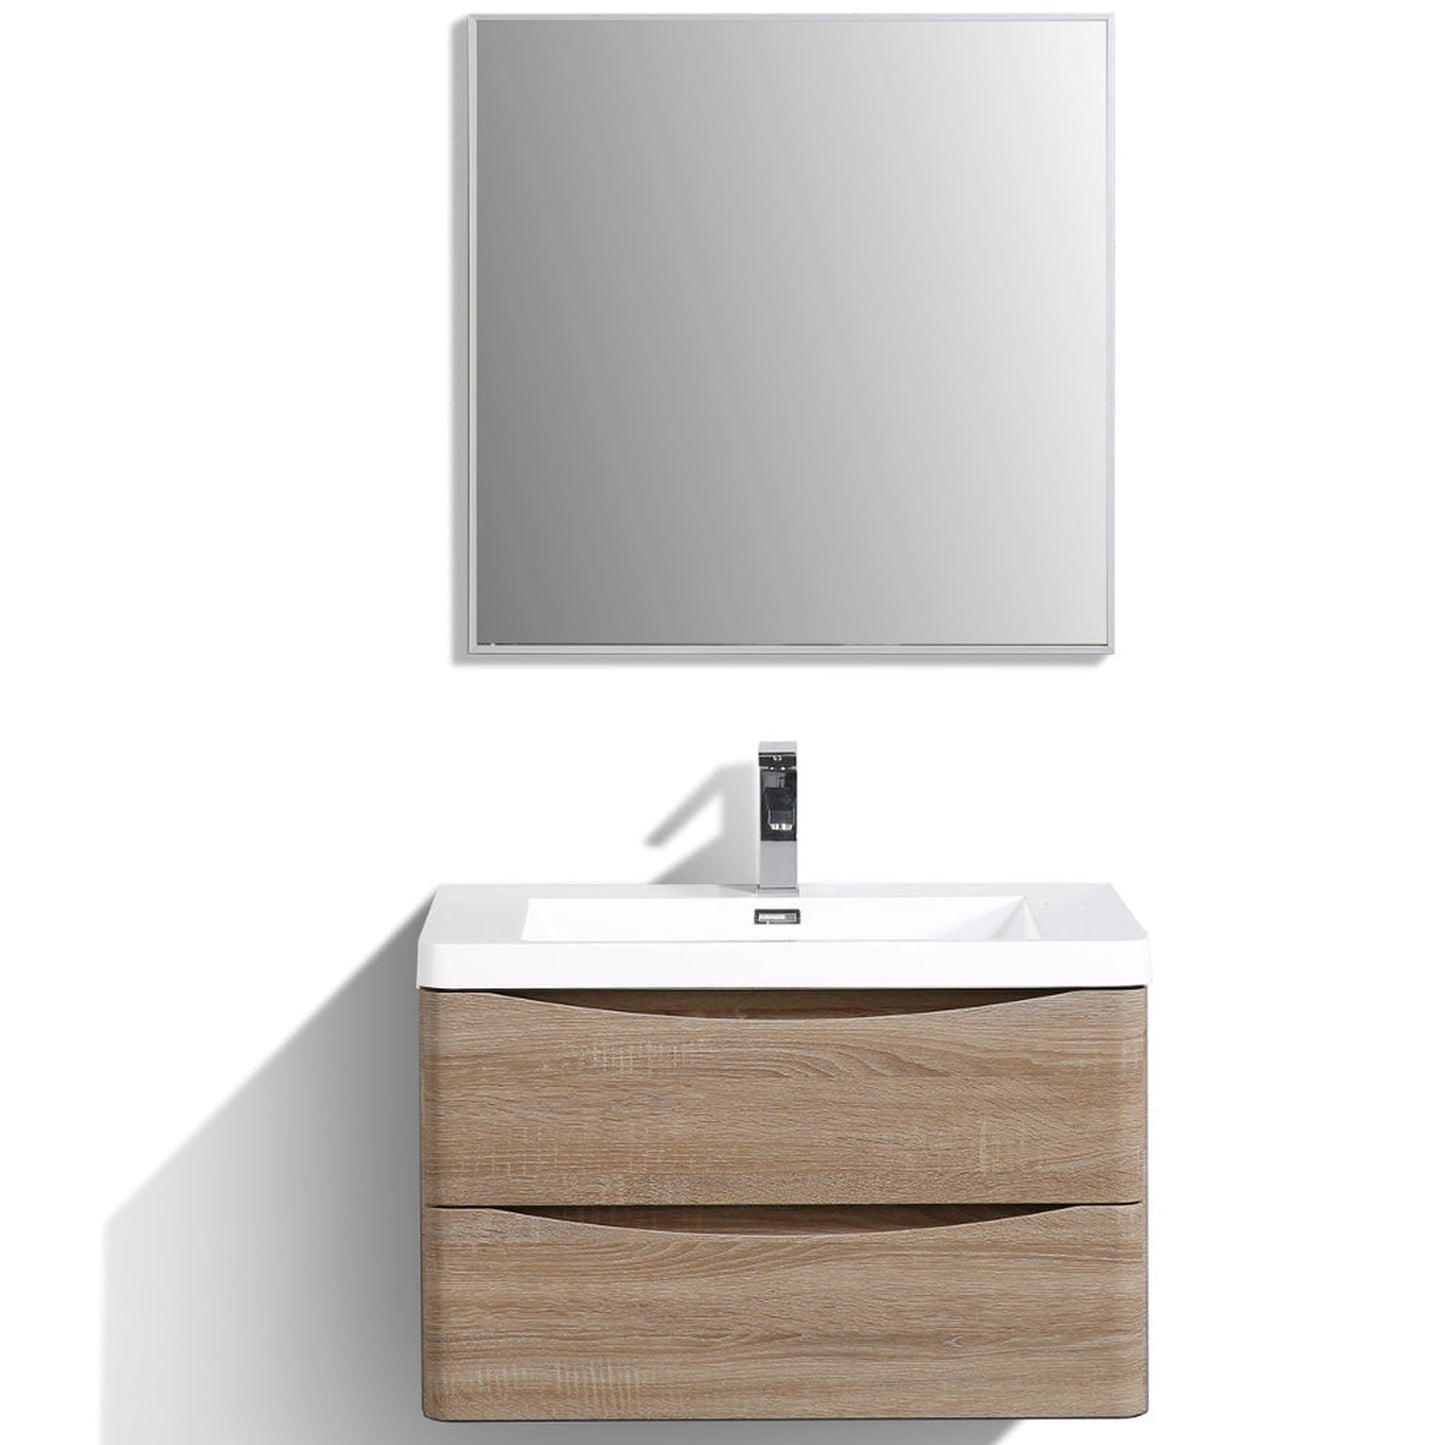 Eviva Smile 30" x 20" White Oak Wall-Mounted Bathroom Vanity With White Single Integrated Sink